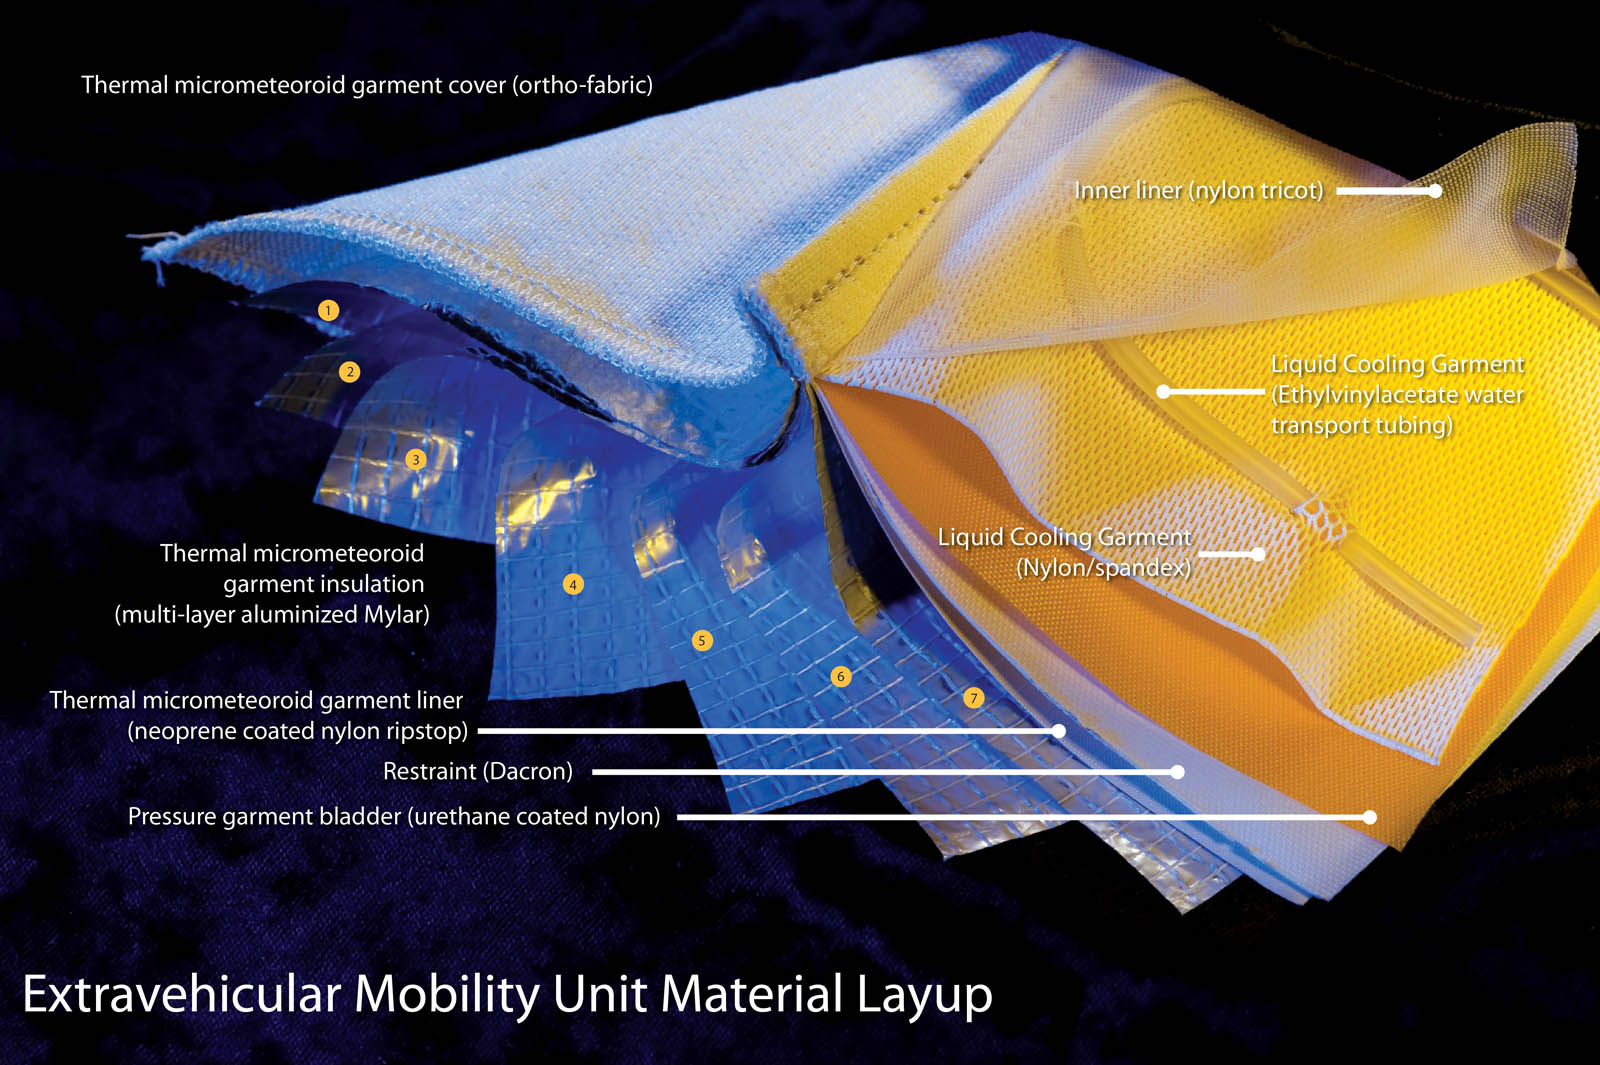 Developing NASA's next-generation spacesuit - Specialty Fabrics Review